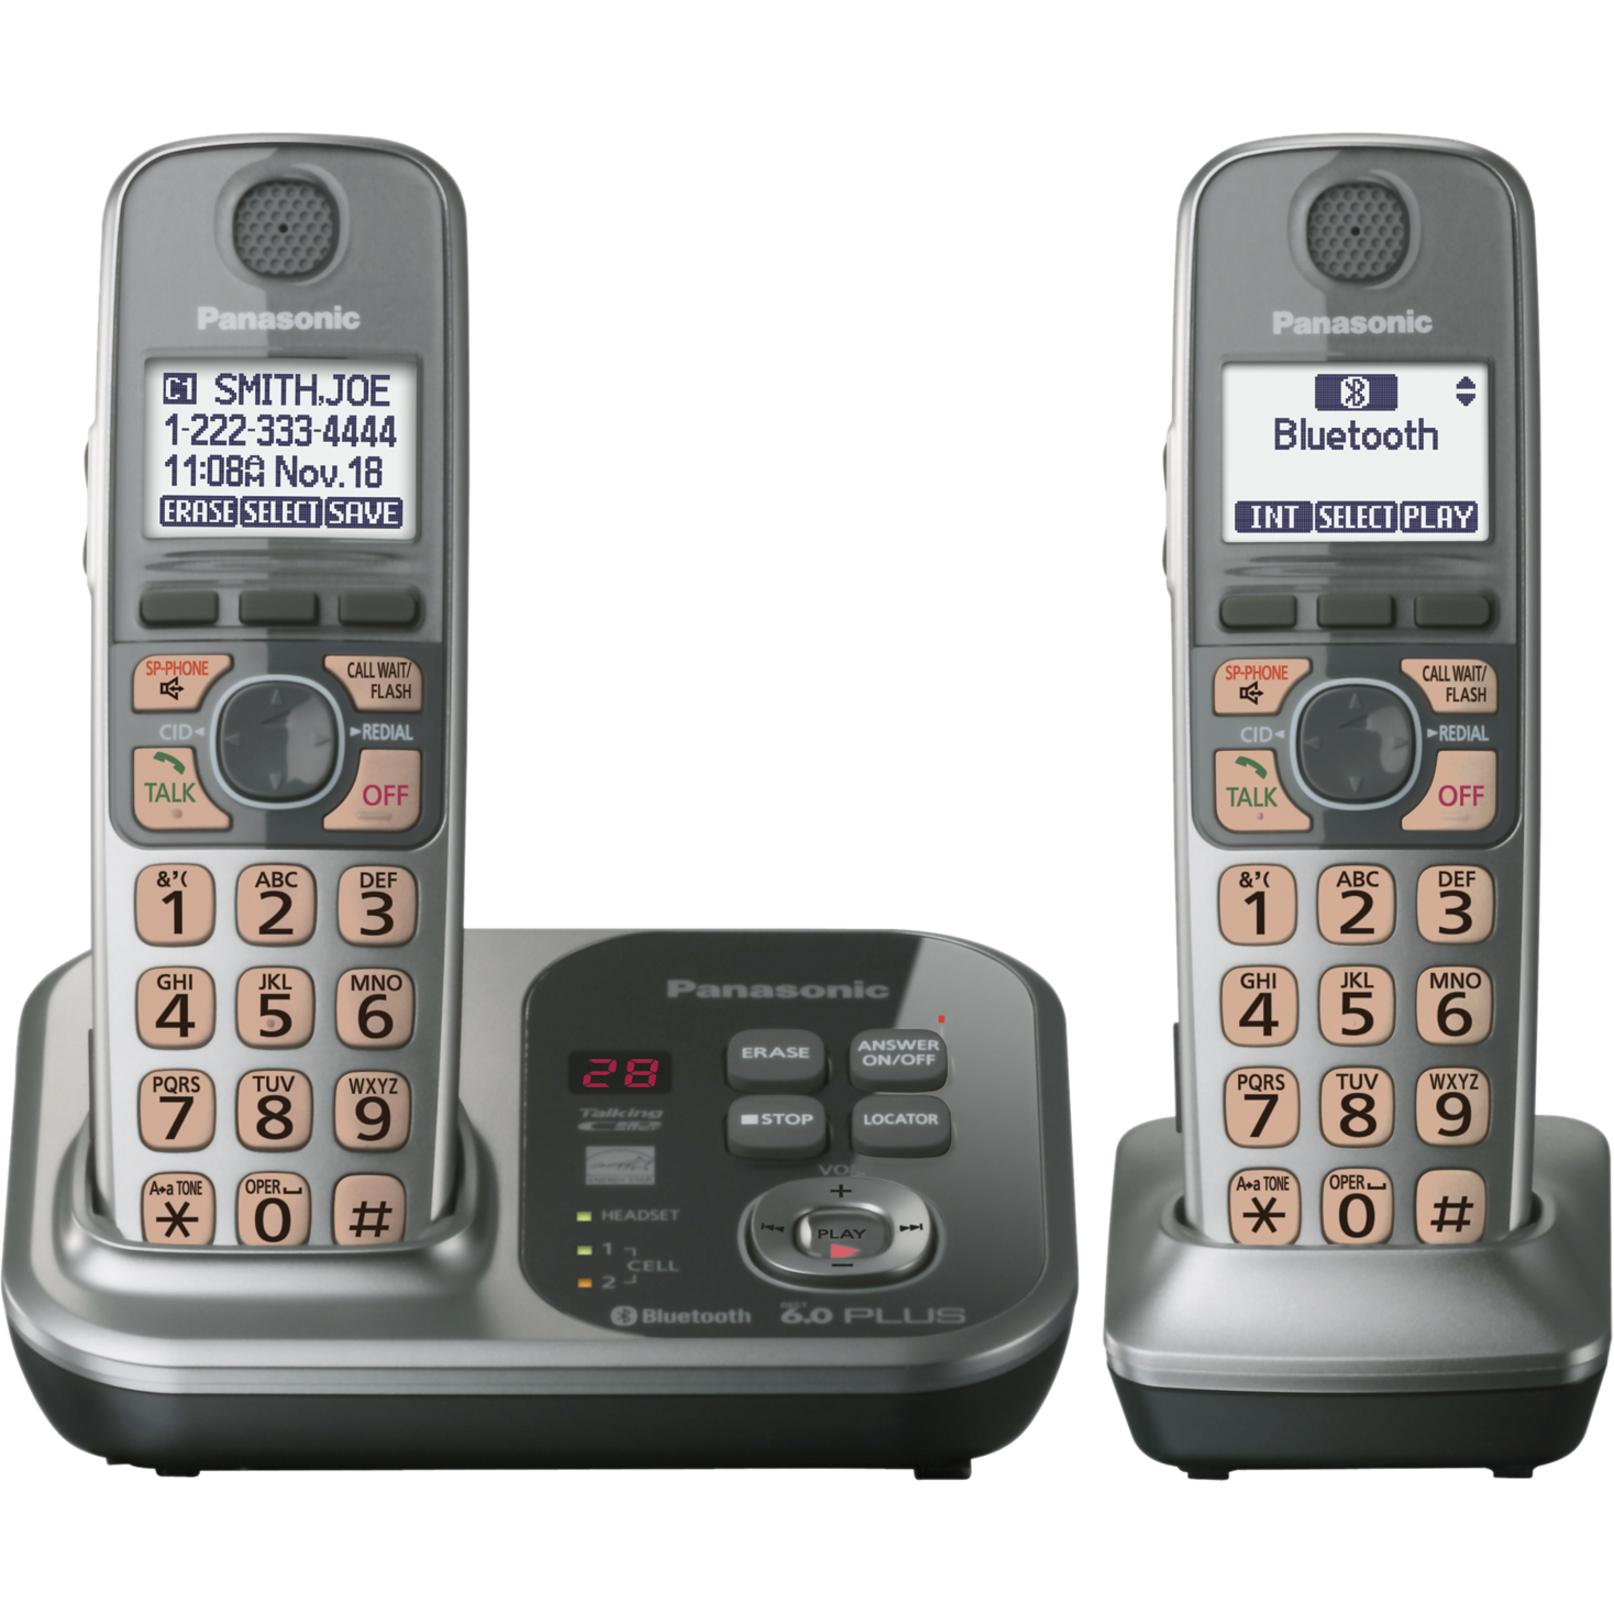 Panasonic KX-TG7732S DECT 6.0 1.90 GHz Cordless Phone, Silver - image 1 of 2